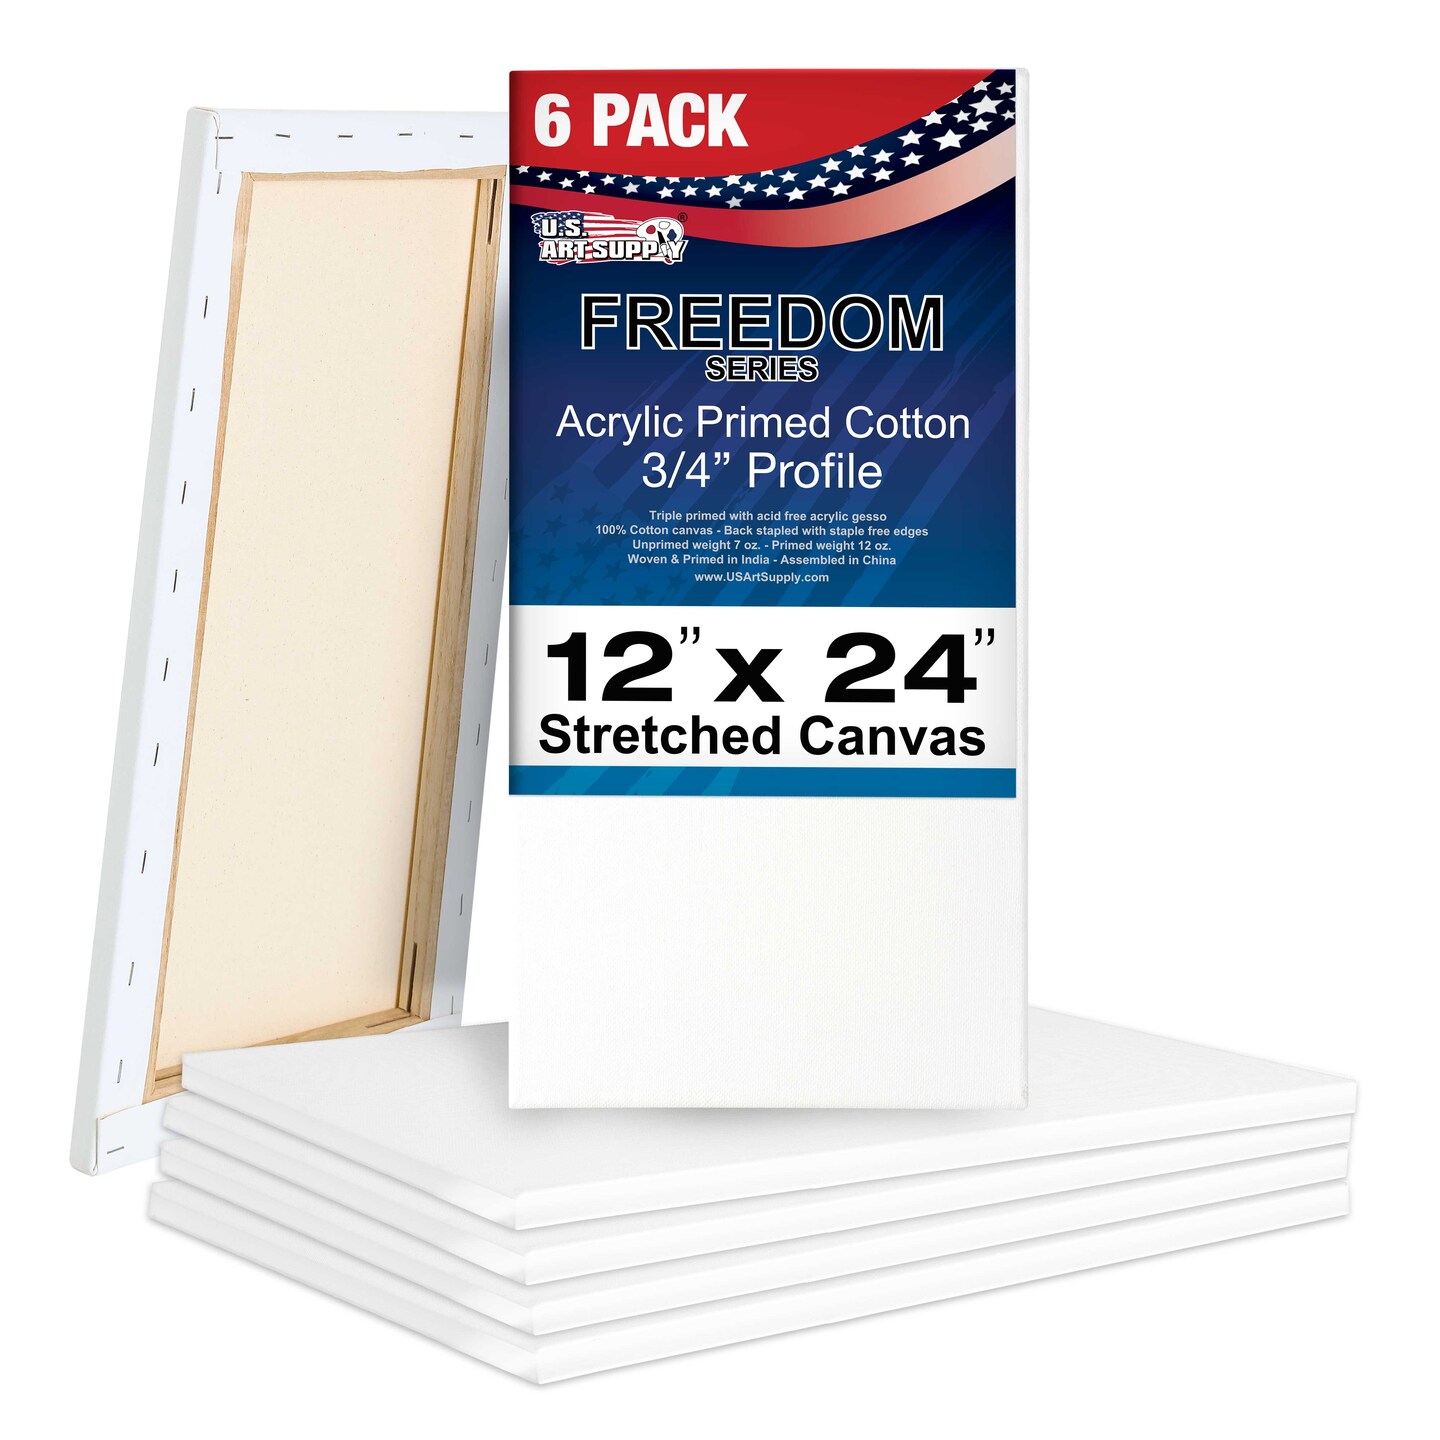 12 x 24 inch Stretched Canvas 12-Ounce Triple Primed, 6-Pack - Professional Artist Quality White Blank 3/4&#x22; Profile, 100% Cotton, Heavy-Weight Gesso